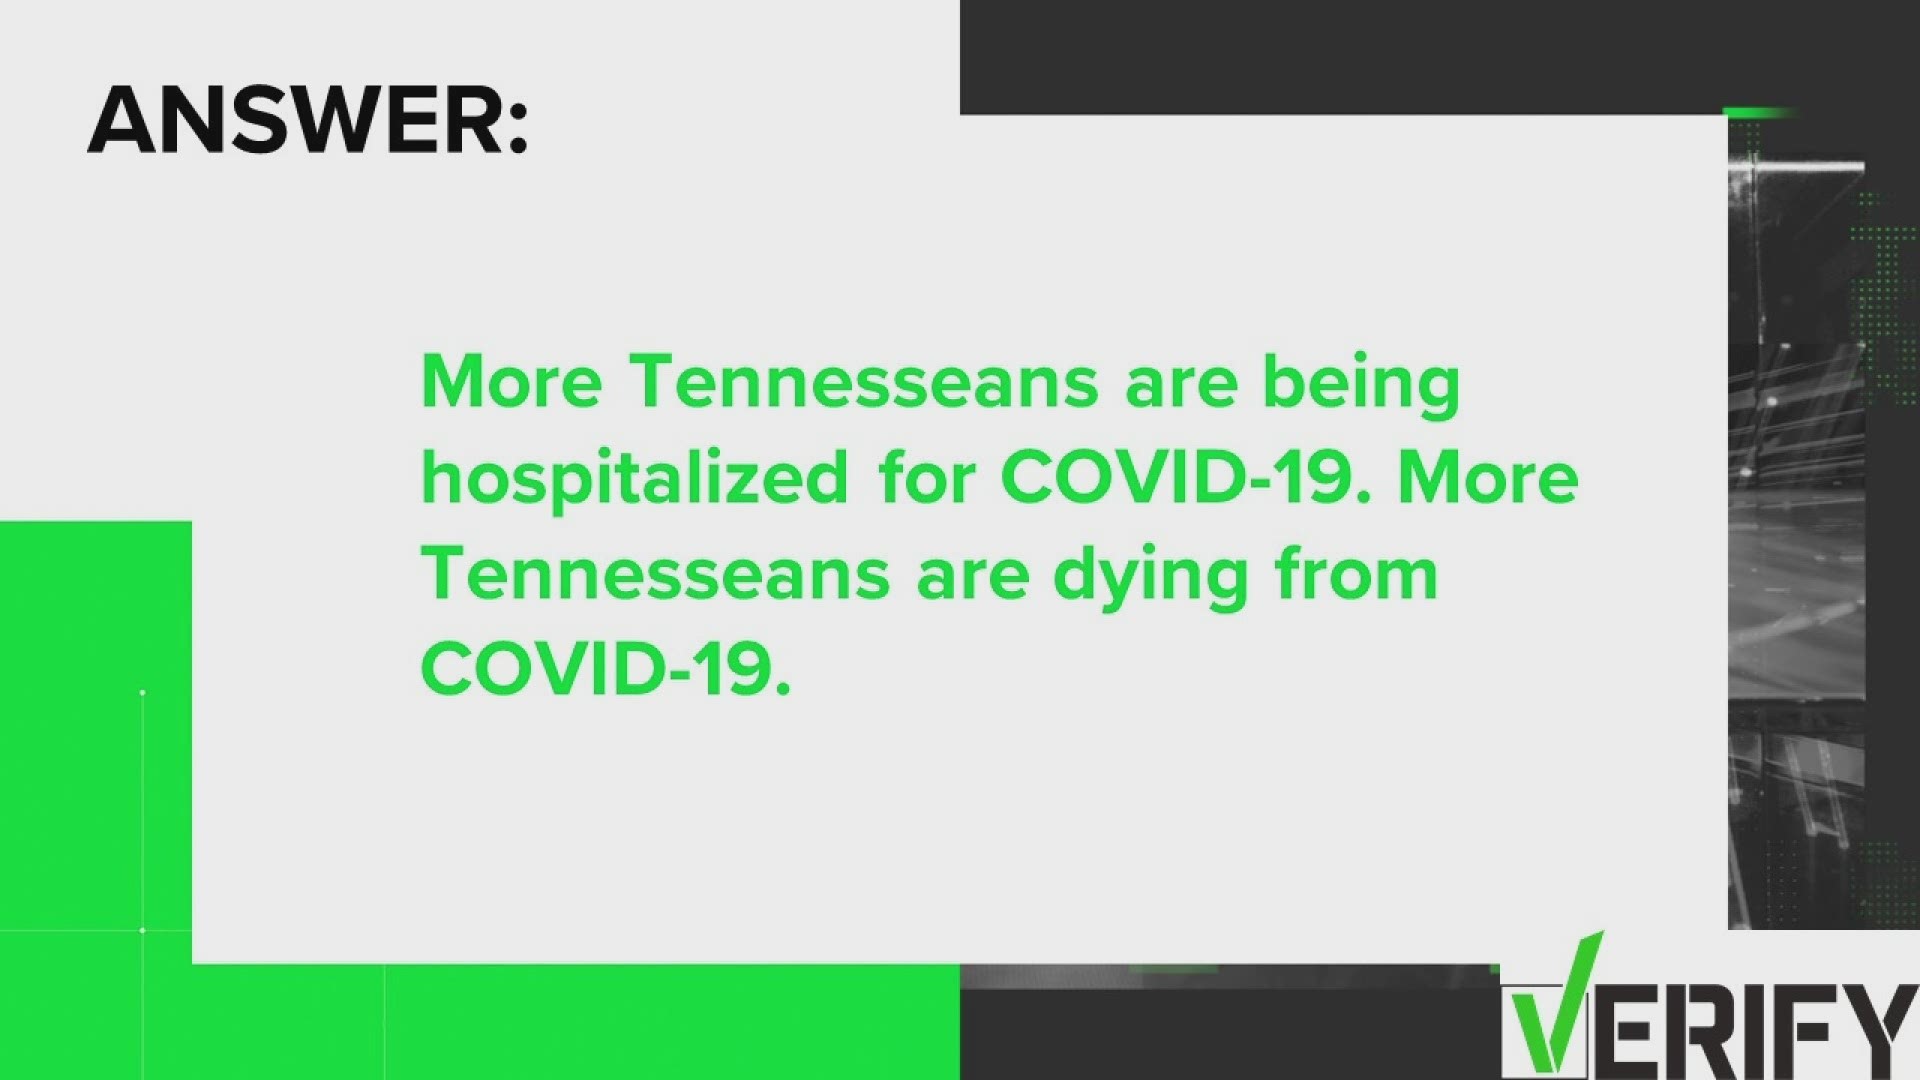 We can verify that more Tennesseans are being hospitalized for COVID-19, and more are dying from it.